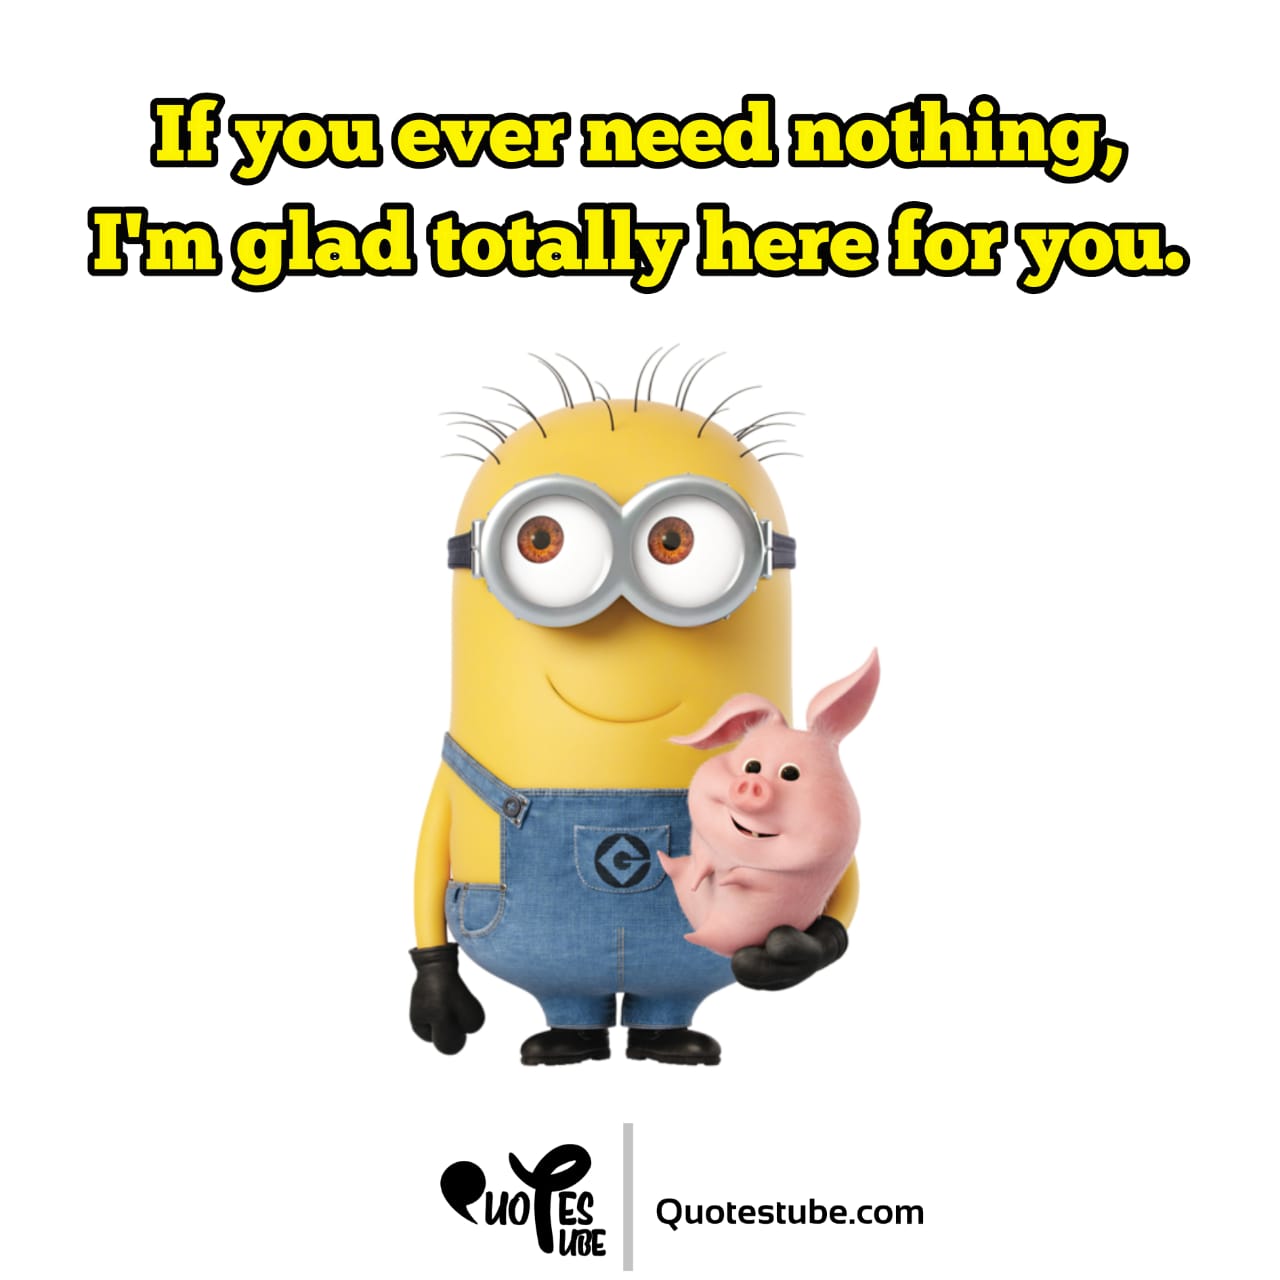 The Ultimate Collection of 999+ Minions Images with Quotes - Incredible ...